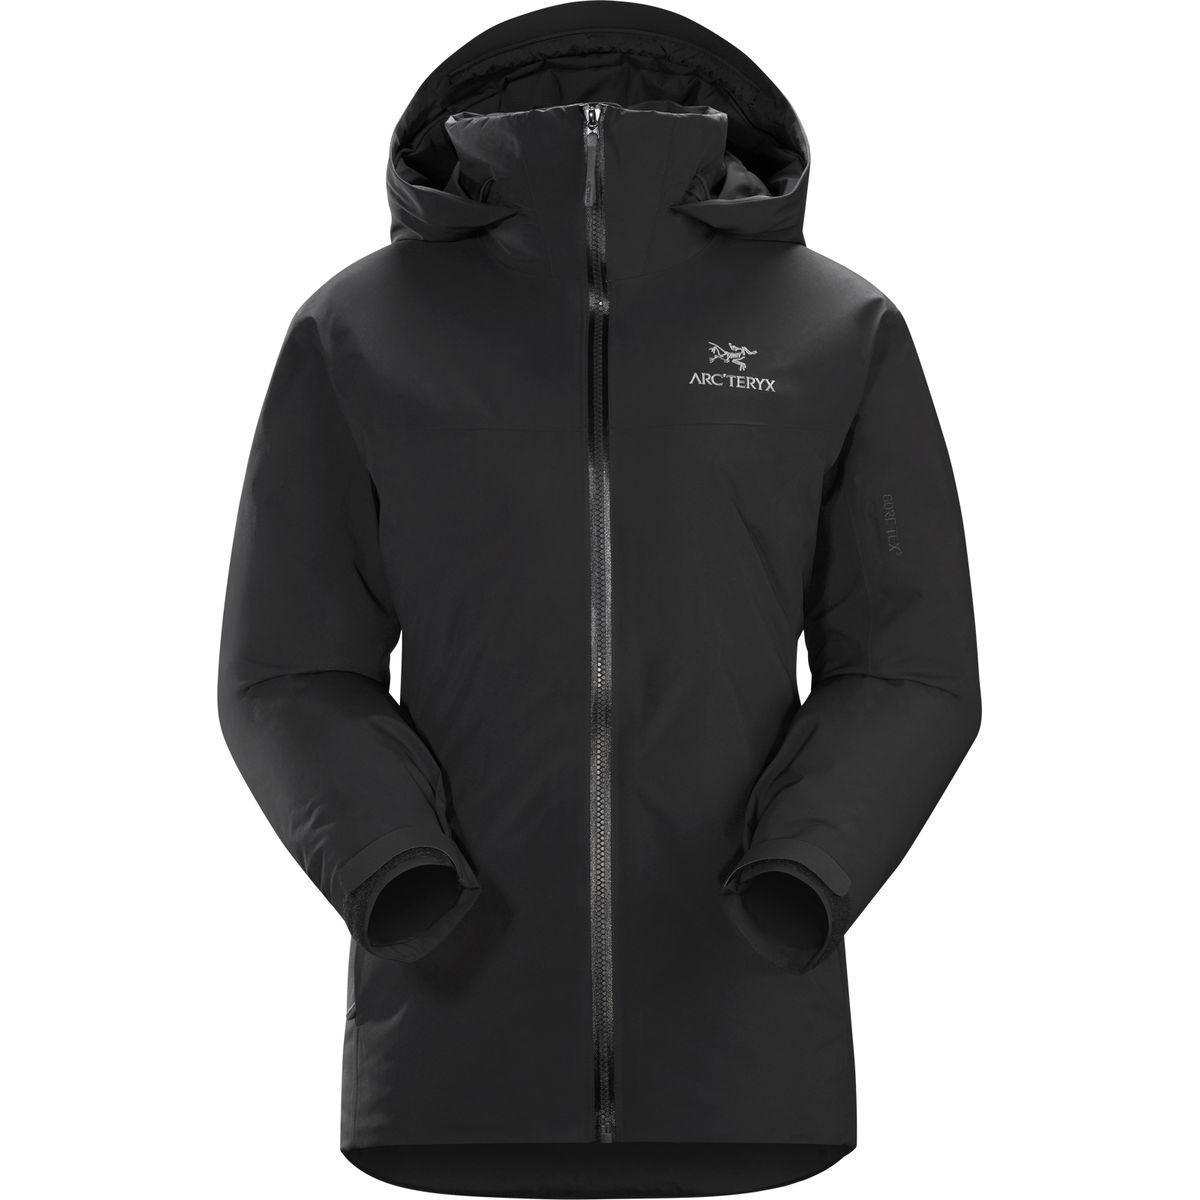 Arc'teryx Synthetic Fission Sv Jacket in Black - Save 16% - Lyst